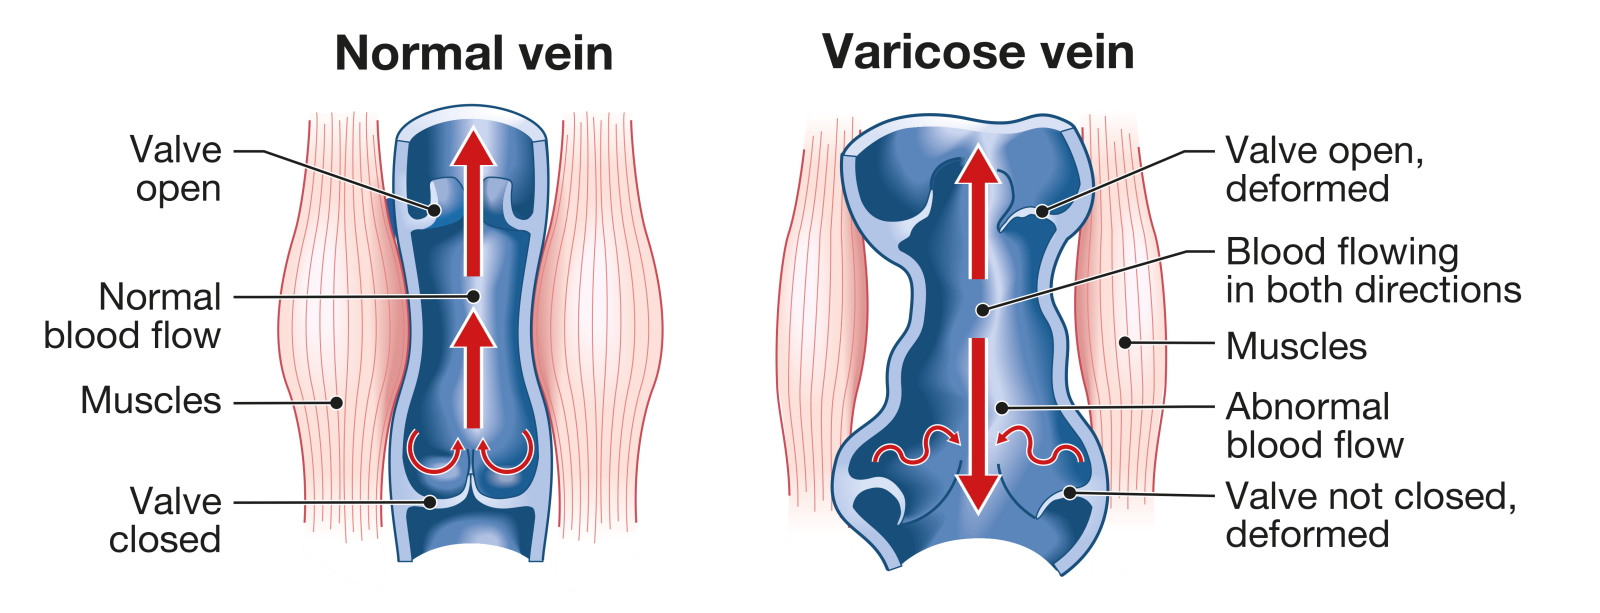 leg pain Illustration showing varicose veins and normal veins